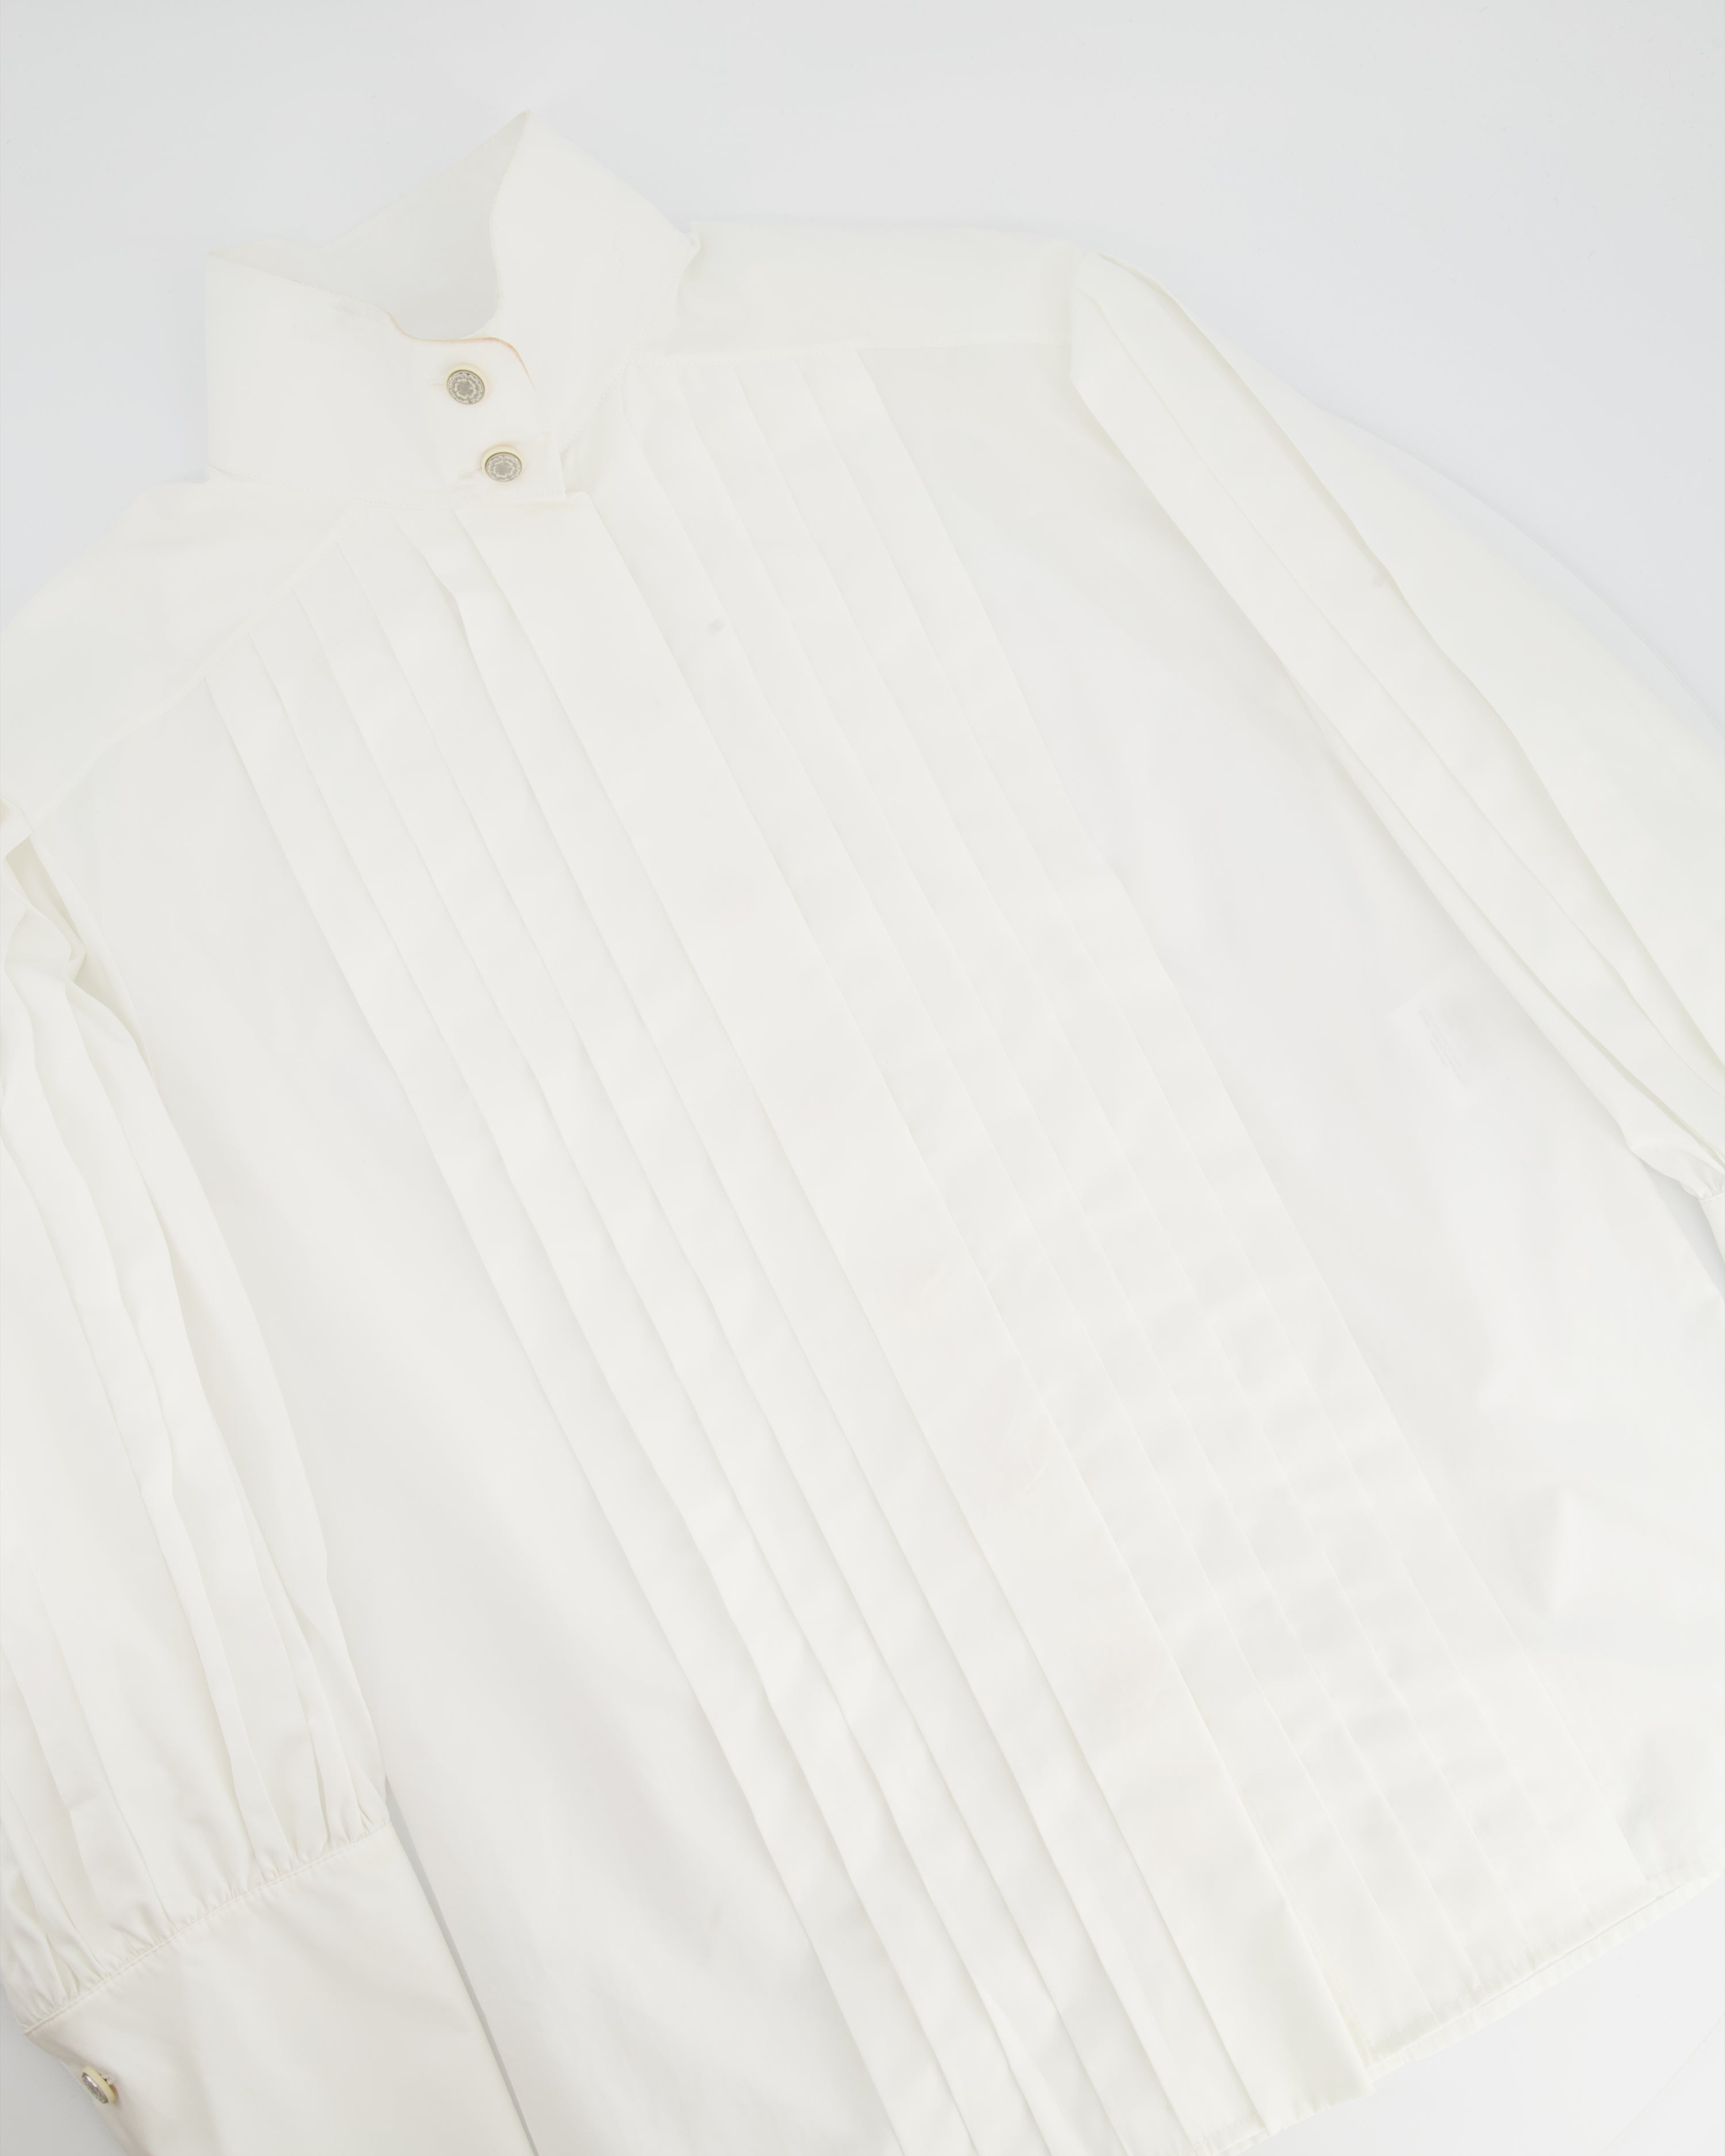 Chanel White Cotton High Neck Pleated Shirt Size FR34 (UK6) RRP £3,720 –  Sellier